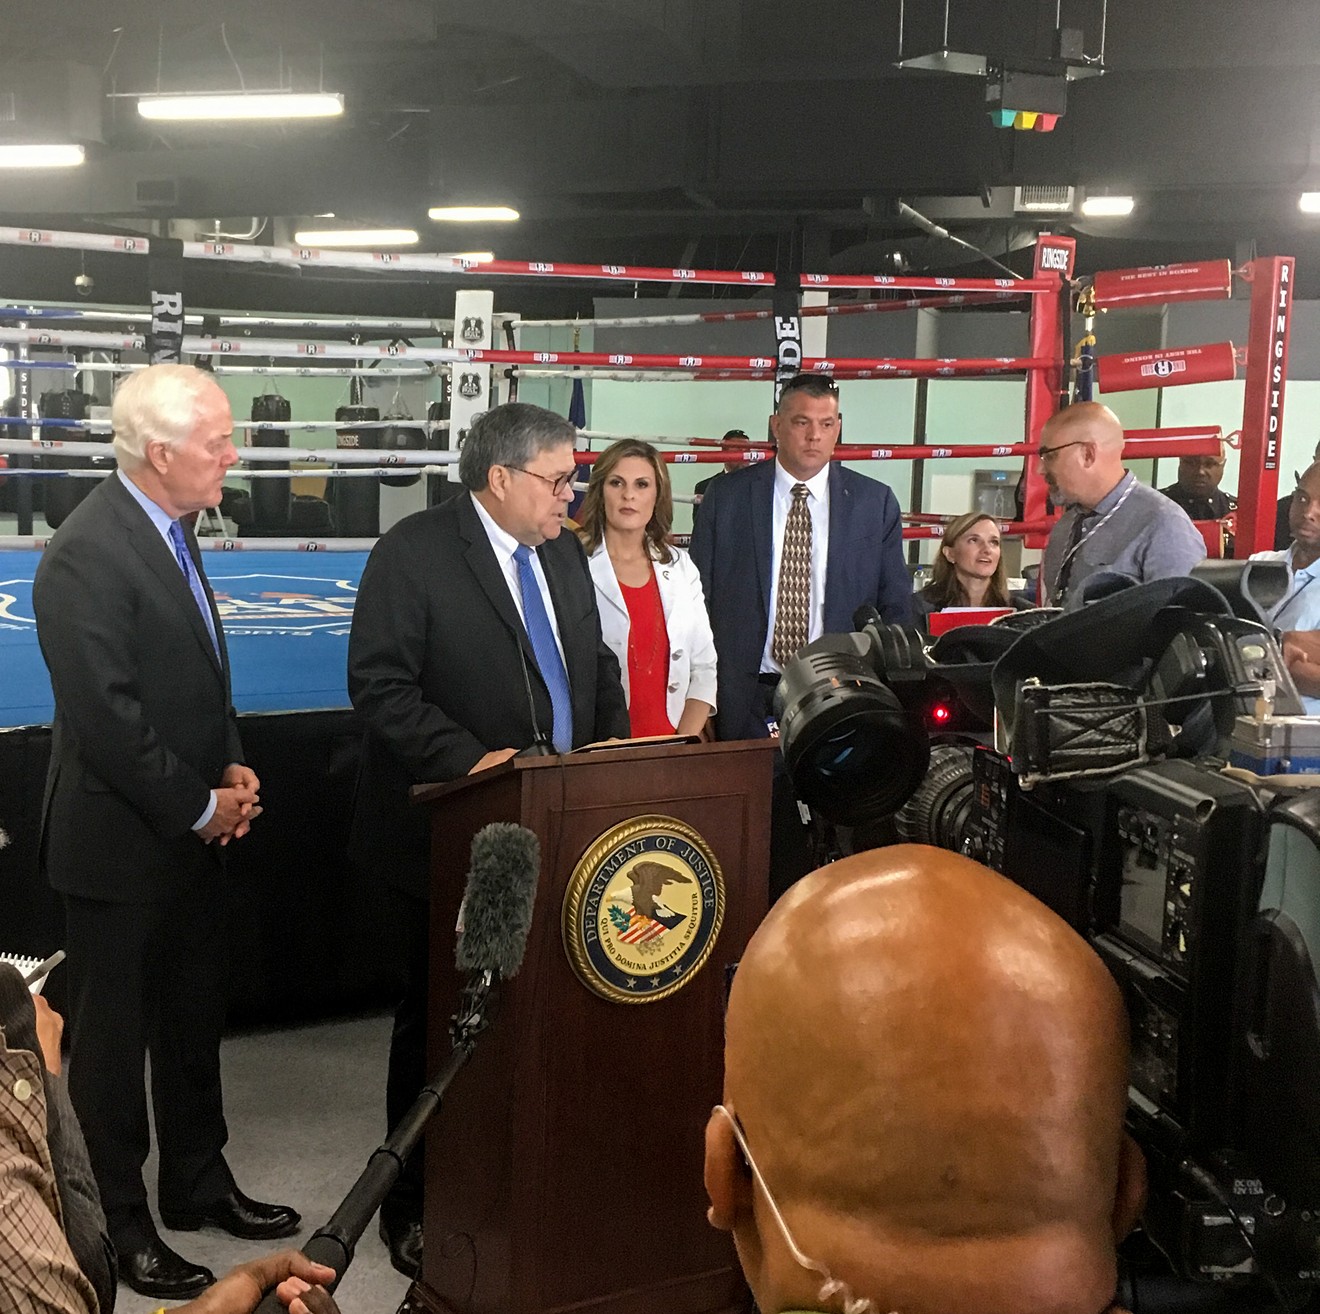 Senator John Cornyn and U.S. Attorney General William Barr take questions at the North Lake Highlands Youth Boxing Gym, where they spoke about a safe neighborhoods initiative.